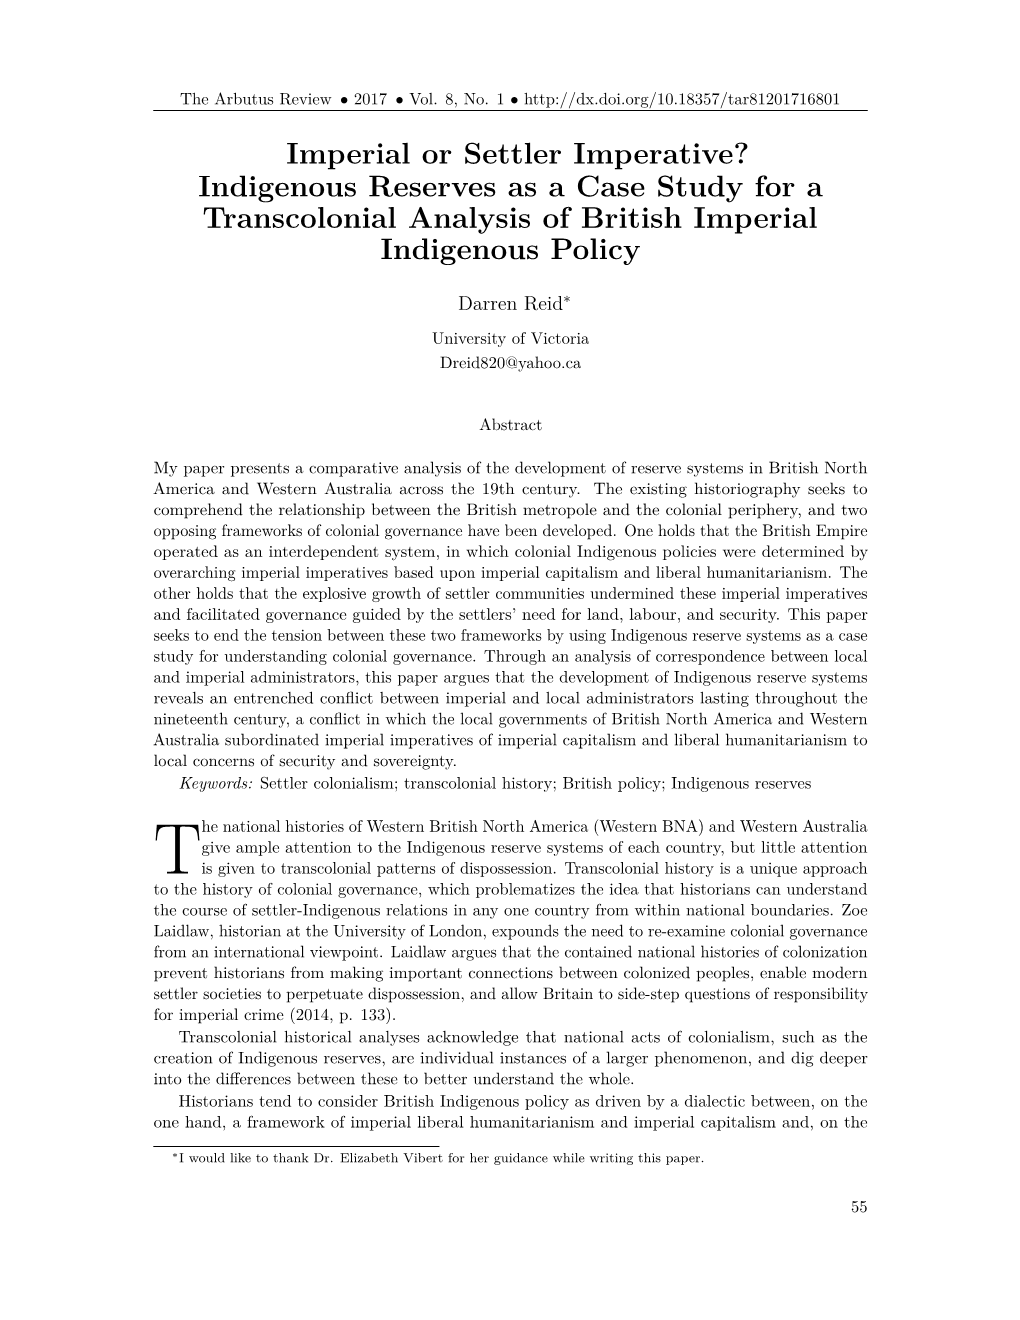 Imperial Or Settler Imperative? Indigenous Reserves As a Case Study for a Transcolonial Analysis of British Imperial Indigenous Policy